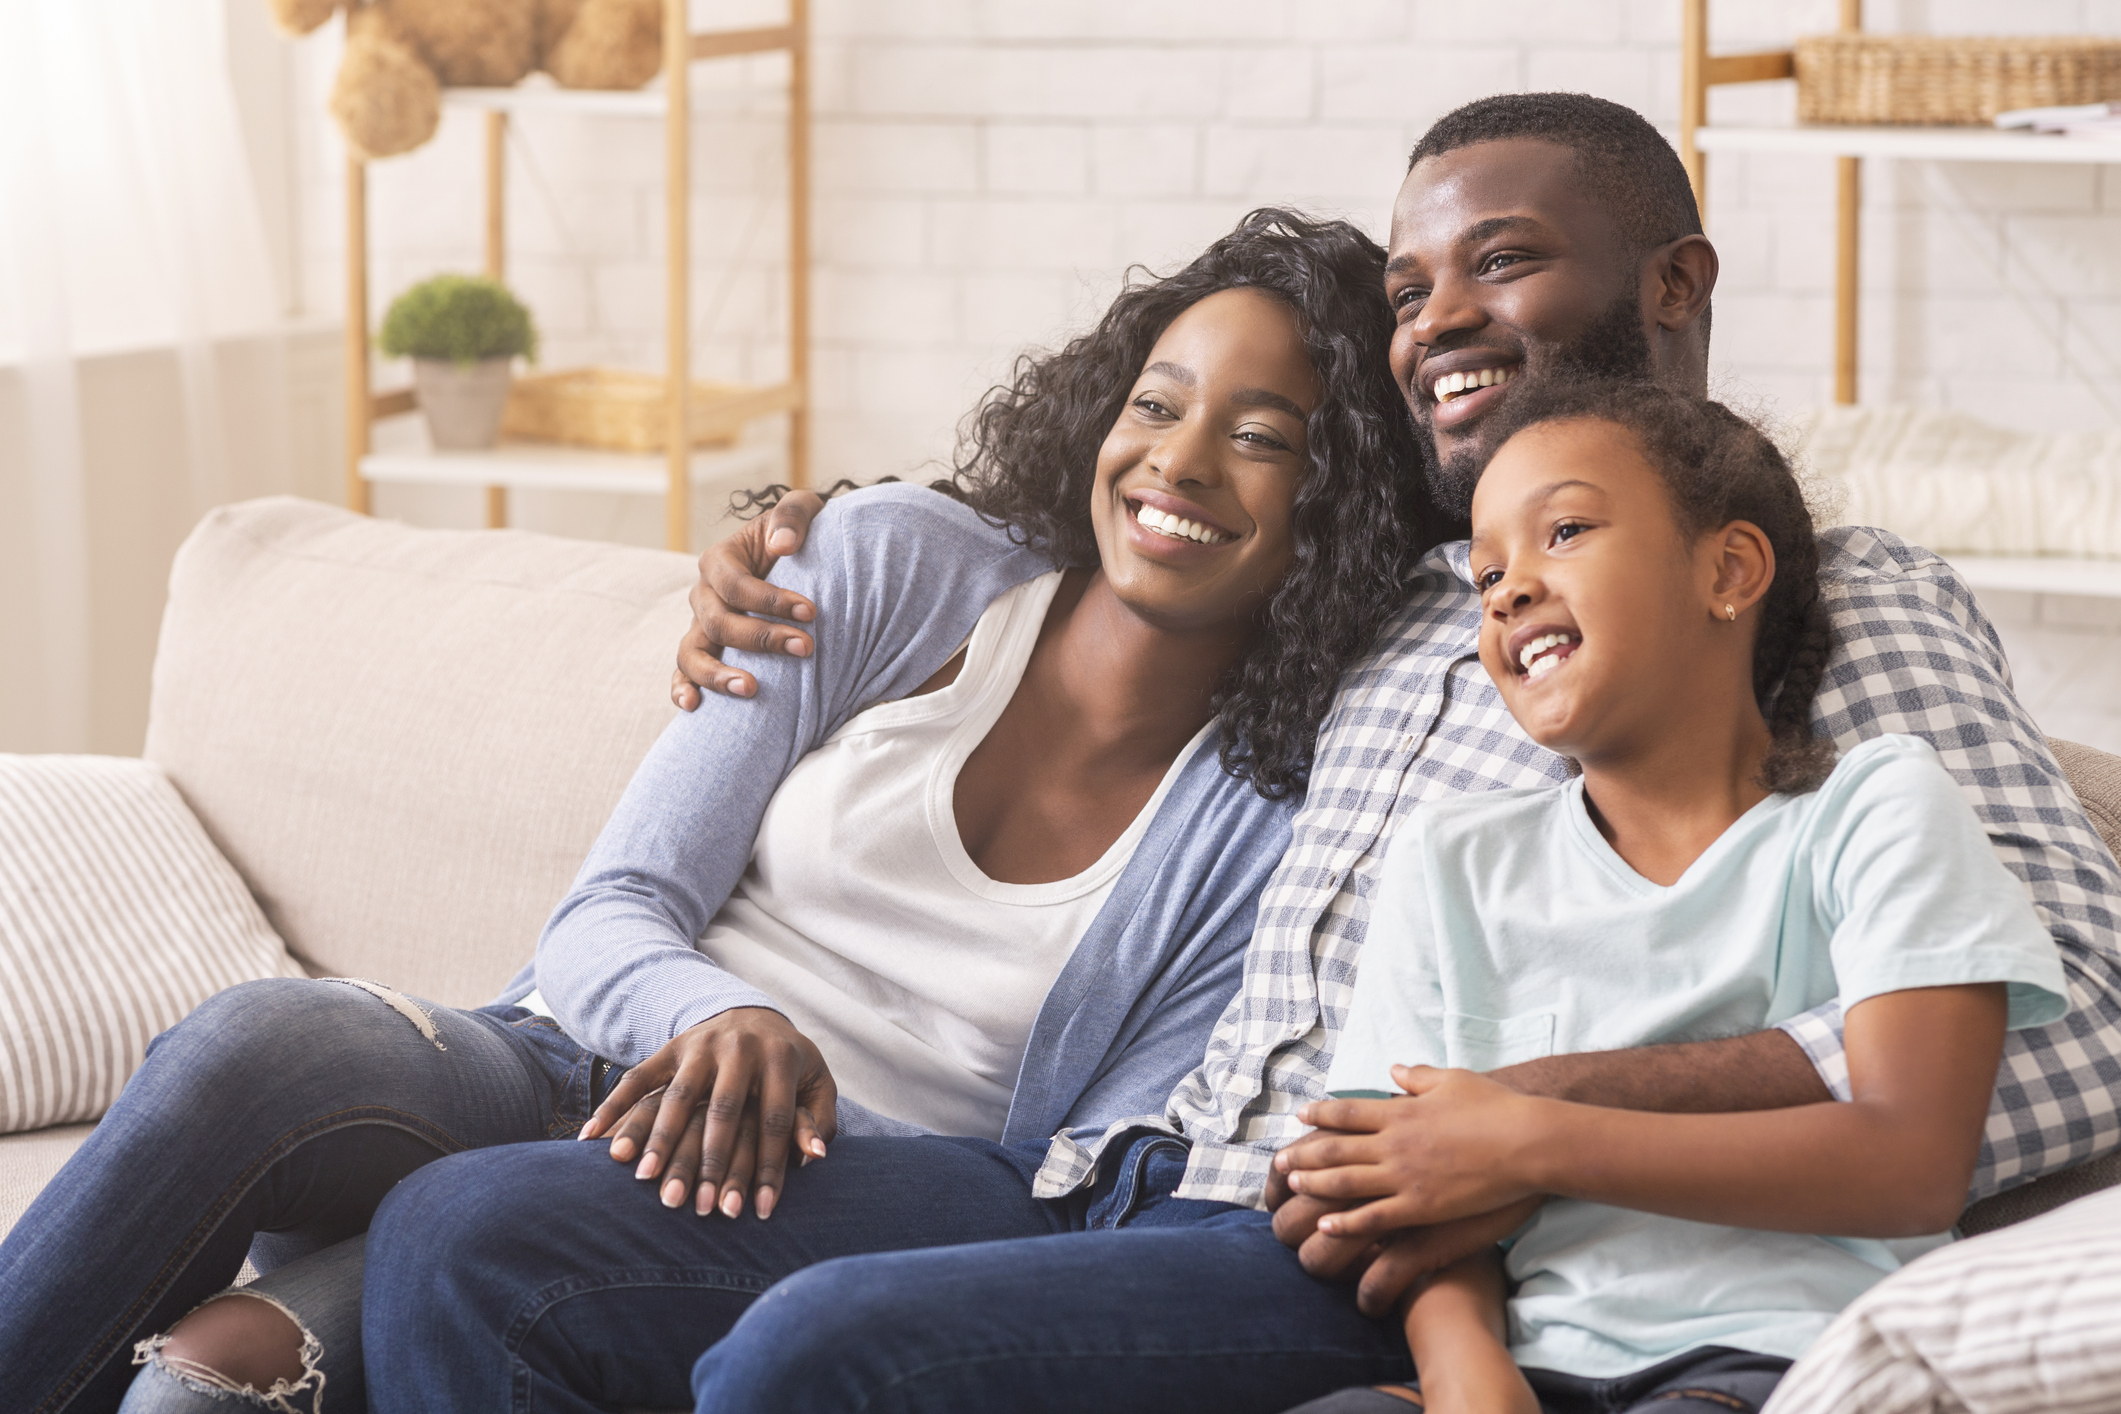 An African-American family, a mother, father, and daughter, relax on a couch.